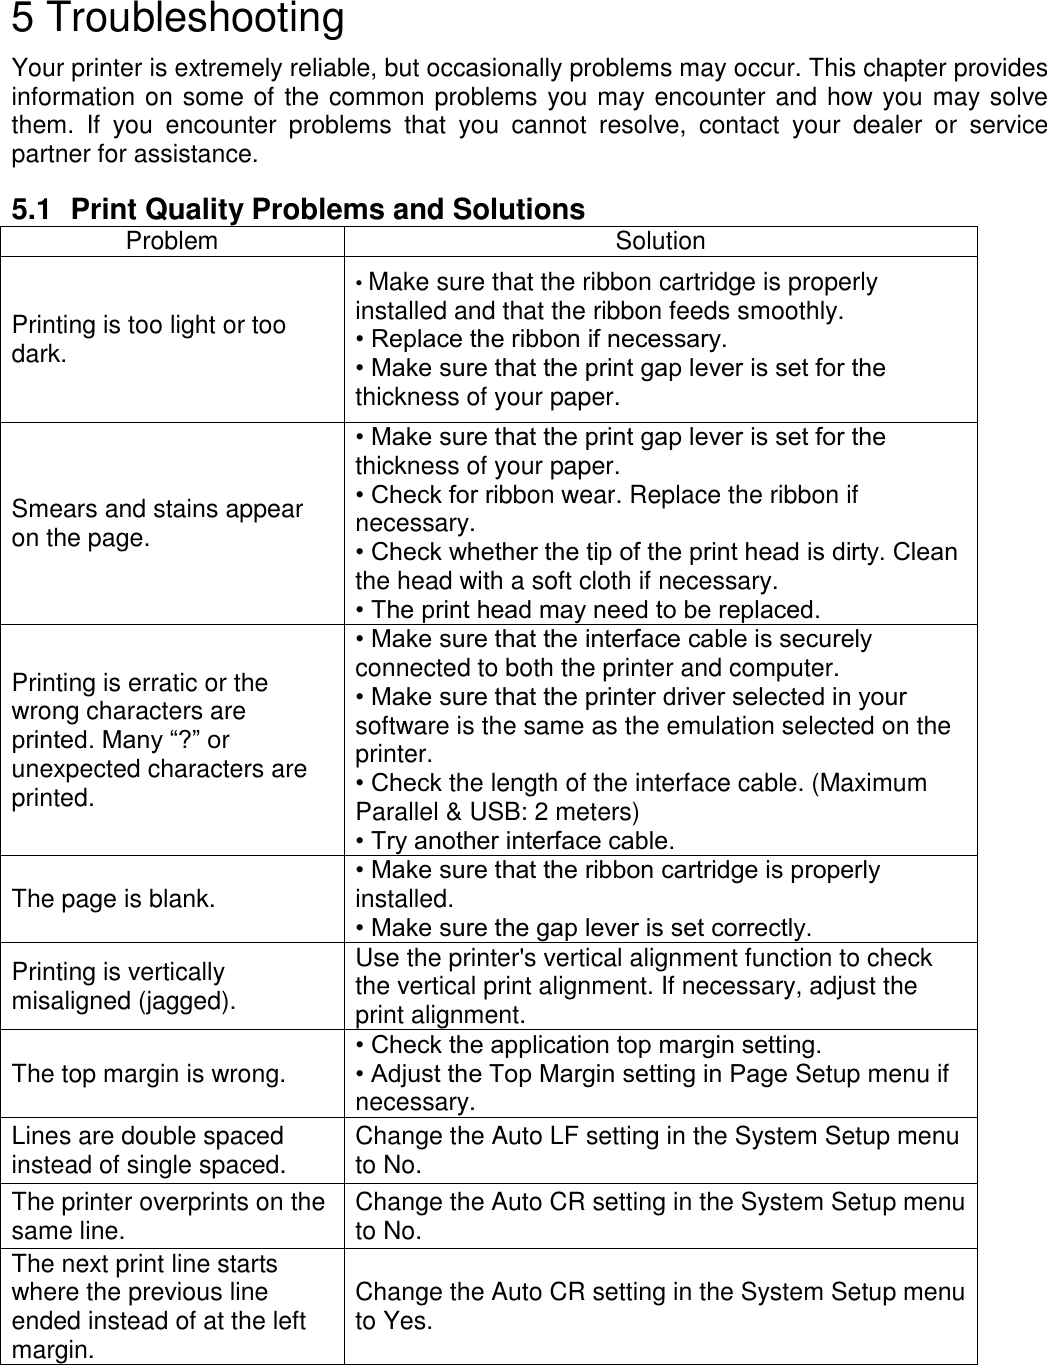    5 Troubleshooting Your printer is extremely reliable, but occasionally problems may occur. This chapter provides information on some of the common problems you may encounter and how you may solve them.  If  you  encounter  problems  that  you  cannot  resolve,  contact  your  dealer  or  service partner for assistance.  5.1  Print Quality Problems and Solutions Problem Solution Printing is too light or too dark.   • Make sure that the ribbon cartridge is properly installed and that the ribbon feeds smoothly. • Replace the ribbon if necessary.     • Make sure that the print gap lever is set for the thickness of your paper.   Smears and stains appear on the page.   • Make sure that the print gap lever is set for the thickness of your paper.   • Check for ribbon wear. Replace the ribbon if necessary.   • Check whether the tip of the print head is dirty. Clean the head with a soft cloth if necessary.   • The print head may need to be replaced.   Printing is erratic or the wrong characters are printed. Many “?” or unexpected characters are printed.   • Make sure that the interface cable is securely connected to both the printer and computer.   • Make sure that the printer driver selected in your software is the same as the emulation selected on the printer. • Check the length of the interface cable. (Maximum Parallel &amp; USB: 2 meters) • Try another interface cable. The page is blank.   • Make sure that the ribbon cartridge is properly installed. • Make sure the gap lever is set correctly.   Printing is vertically misaligned (jagged).   Use the printer&apos;s vertical alignment function to check the vertical print alignment. If necessary, adjust the print alignment.   The top margin is wrong.   • Check the application top margin setting. • Adjust the Top Margin setting in Page Setup menu if necessary. Lines are double spaced instead of single spaced.   Change the Auto LF setting in the System Setup menu to No.   The printer overprints on the same line.   Change the Auto CR setting in the System Setup menu to No. The next print line starts where the previous line ended instead of at the left margin.   Change the Auto CR setting in the System Setup menu to Yes.  